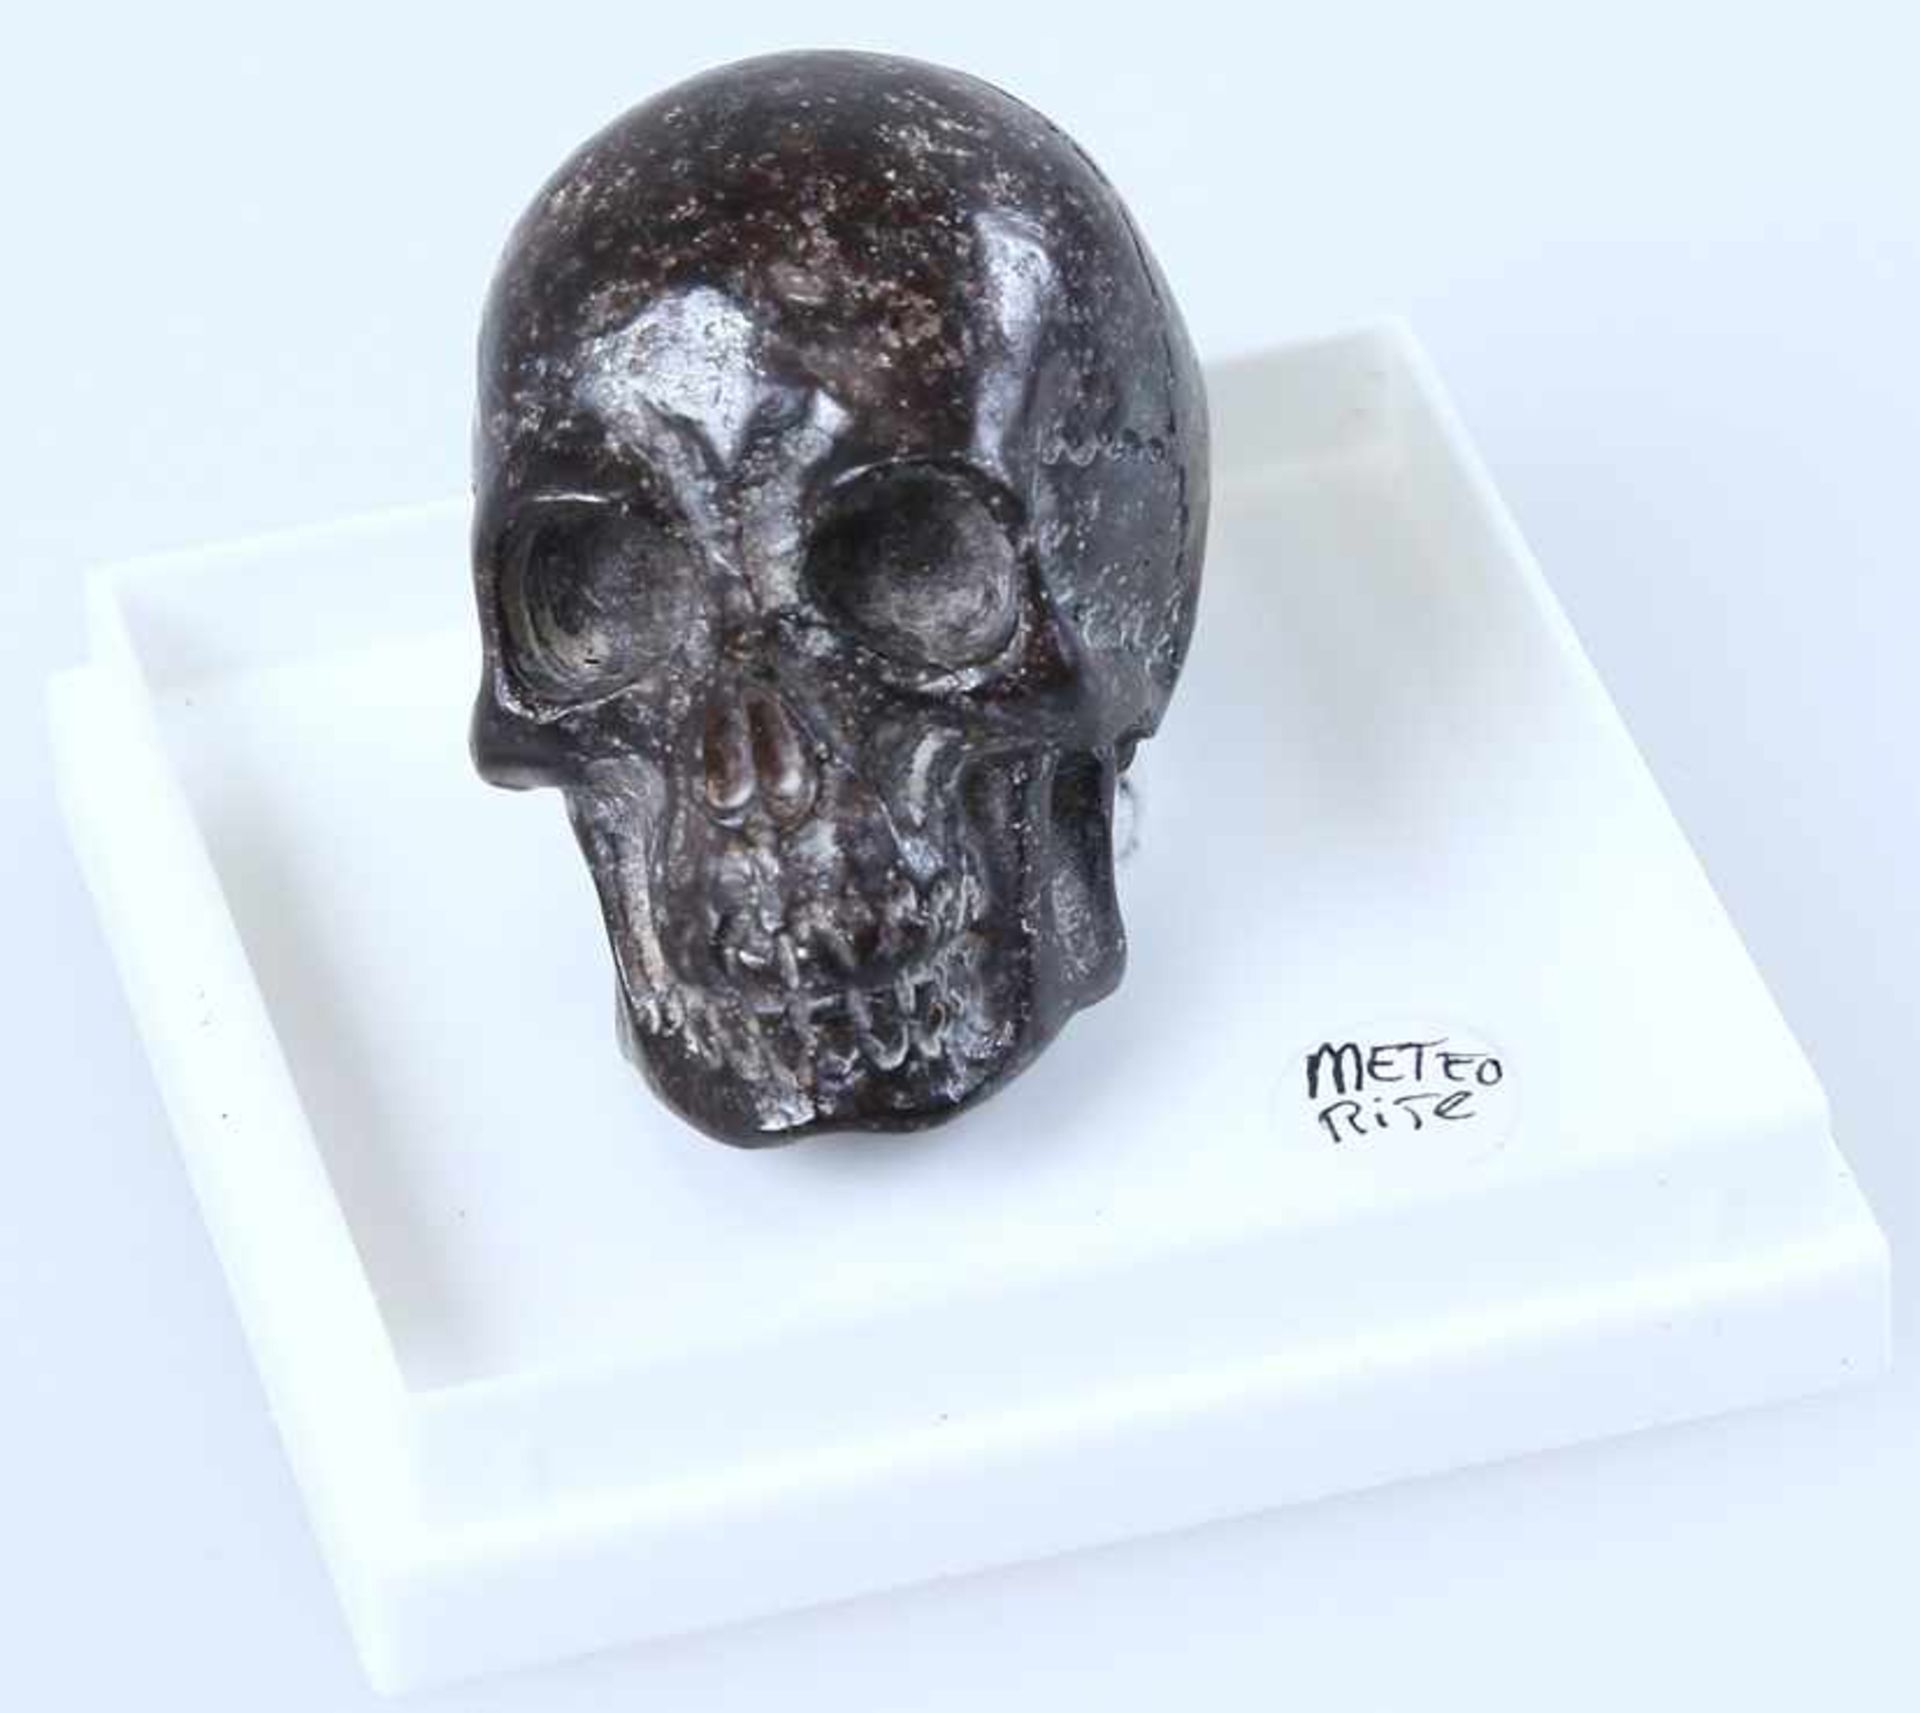 From a stony meteorite (undescribed), H-L chondrite, 4.5 billion years old, a skull (height c. 30